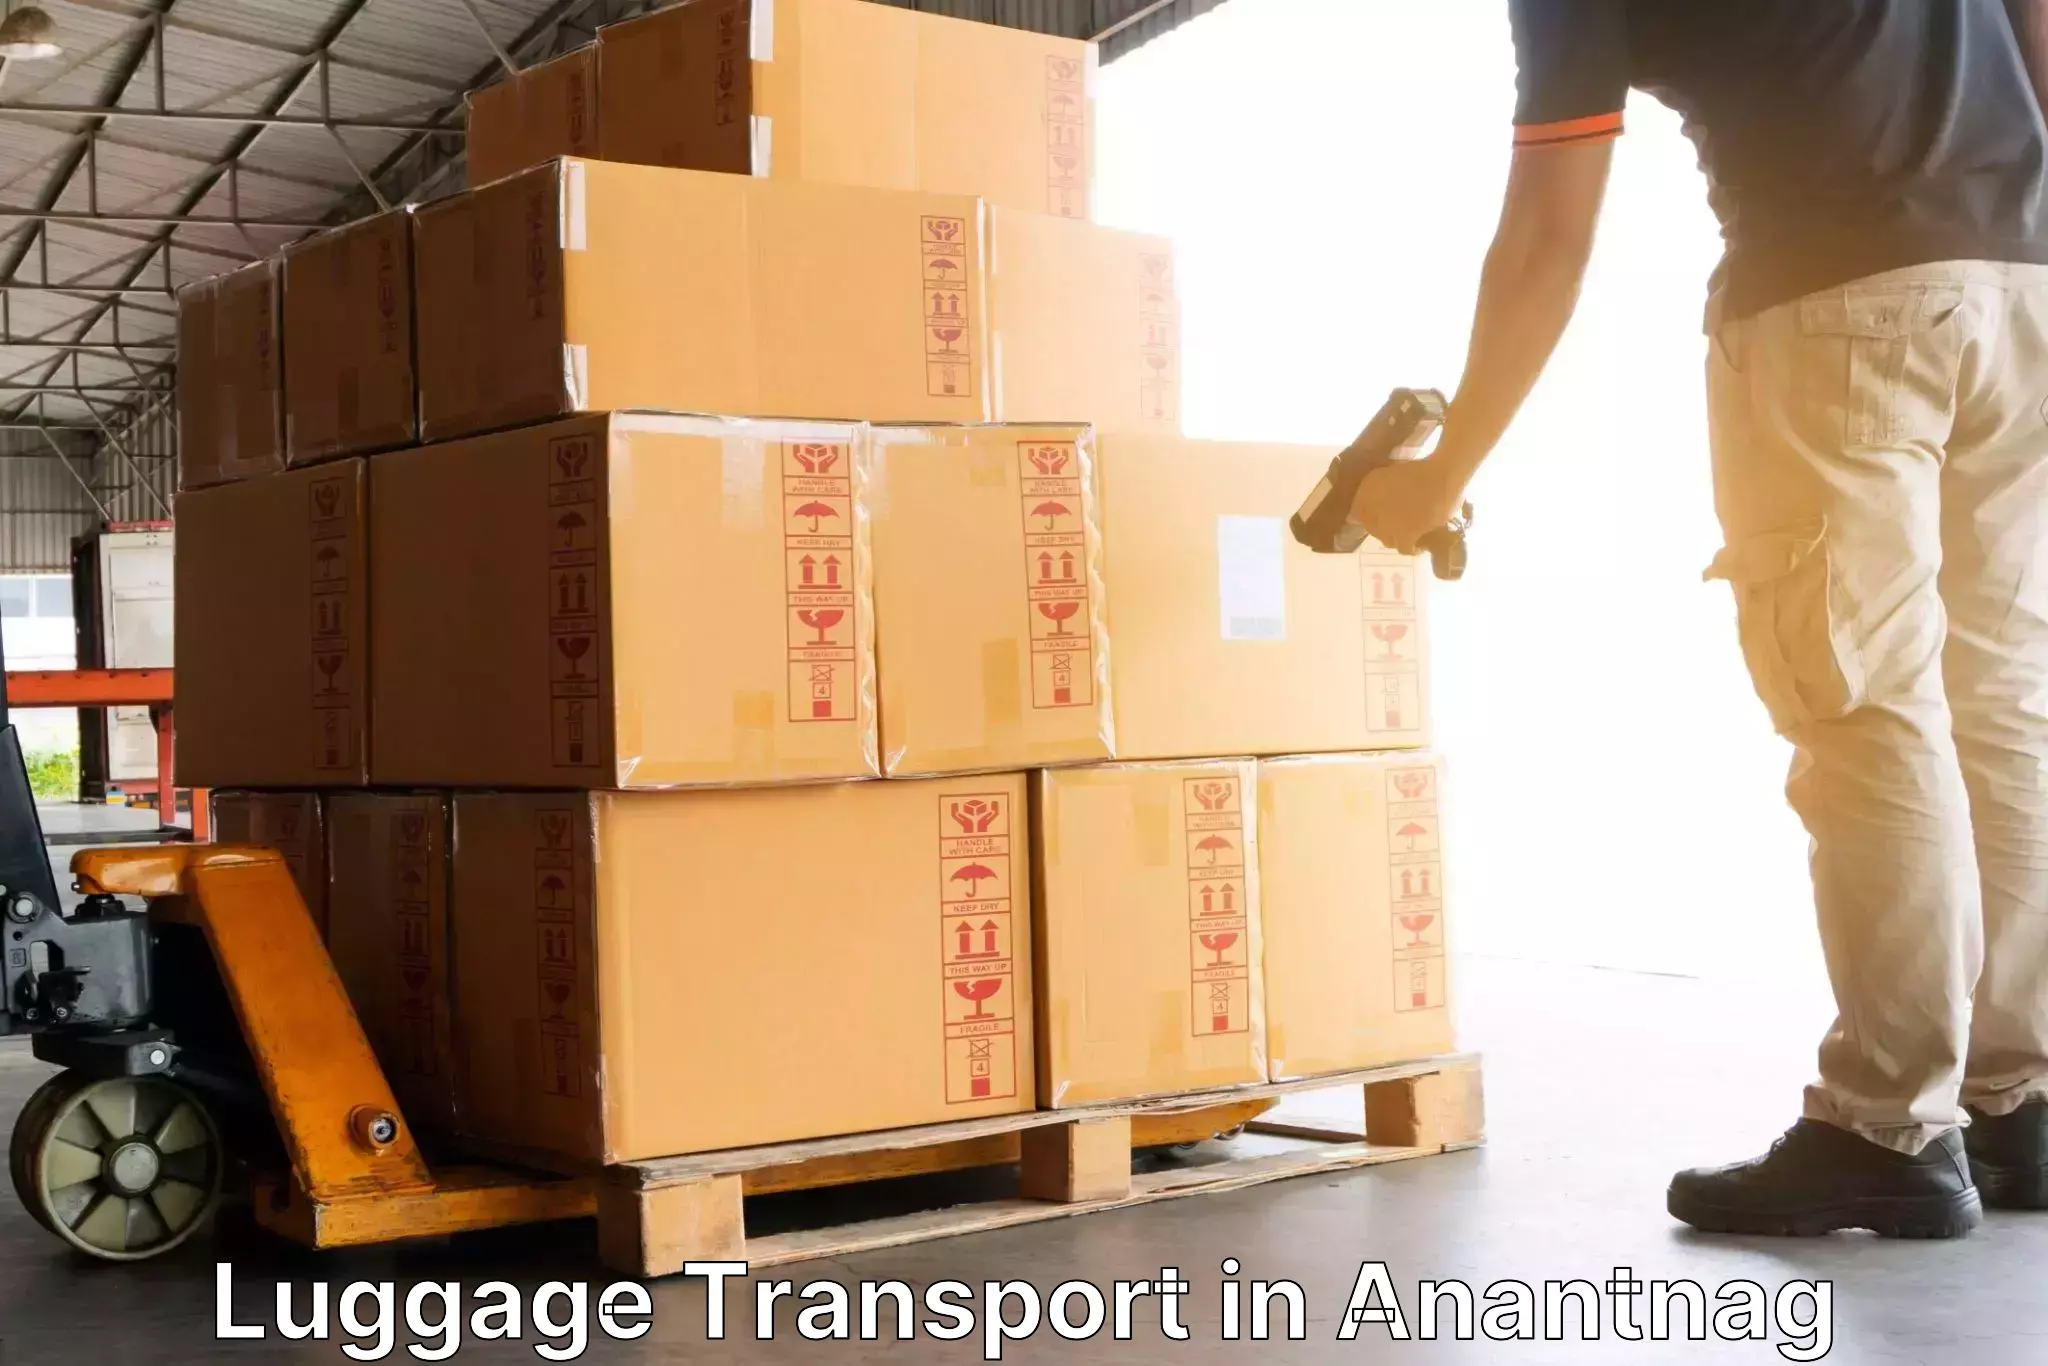 Heavy luggage shipping in Anantnag